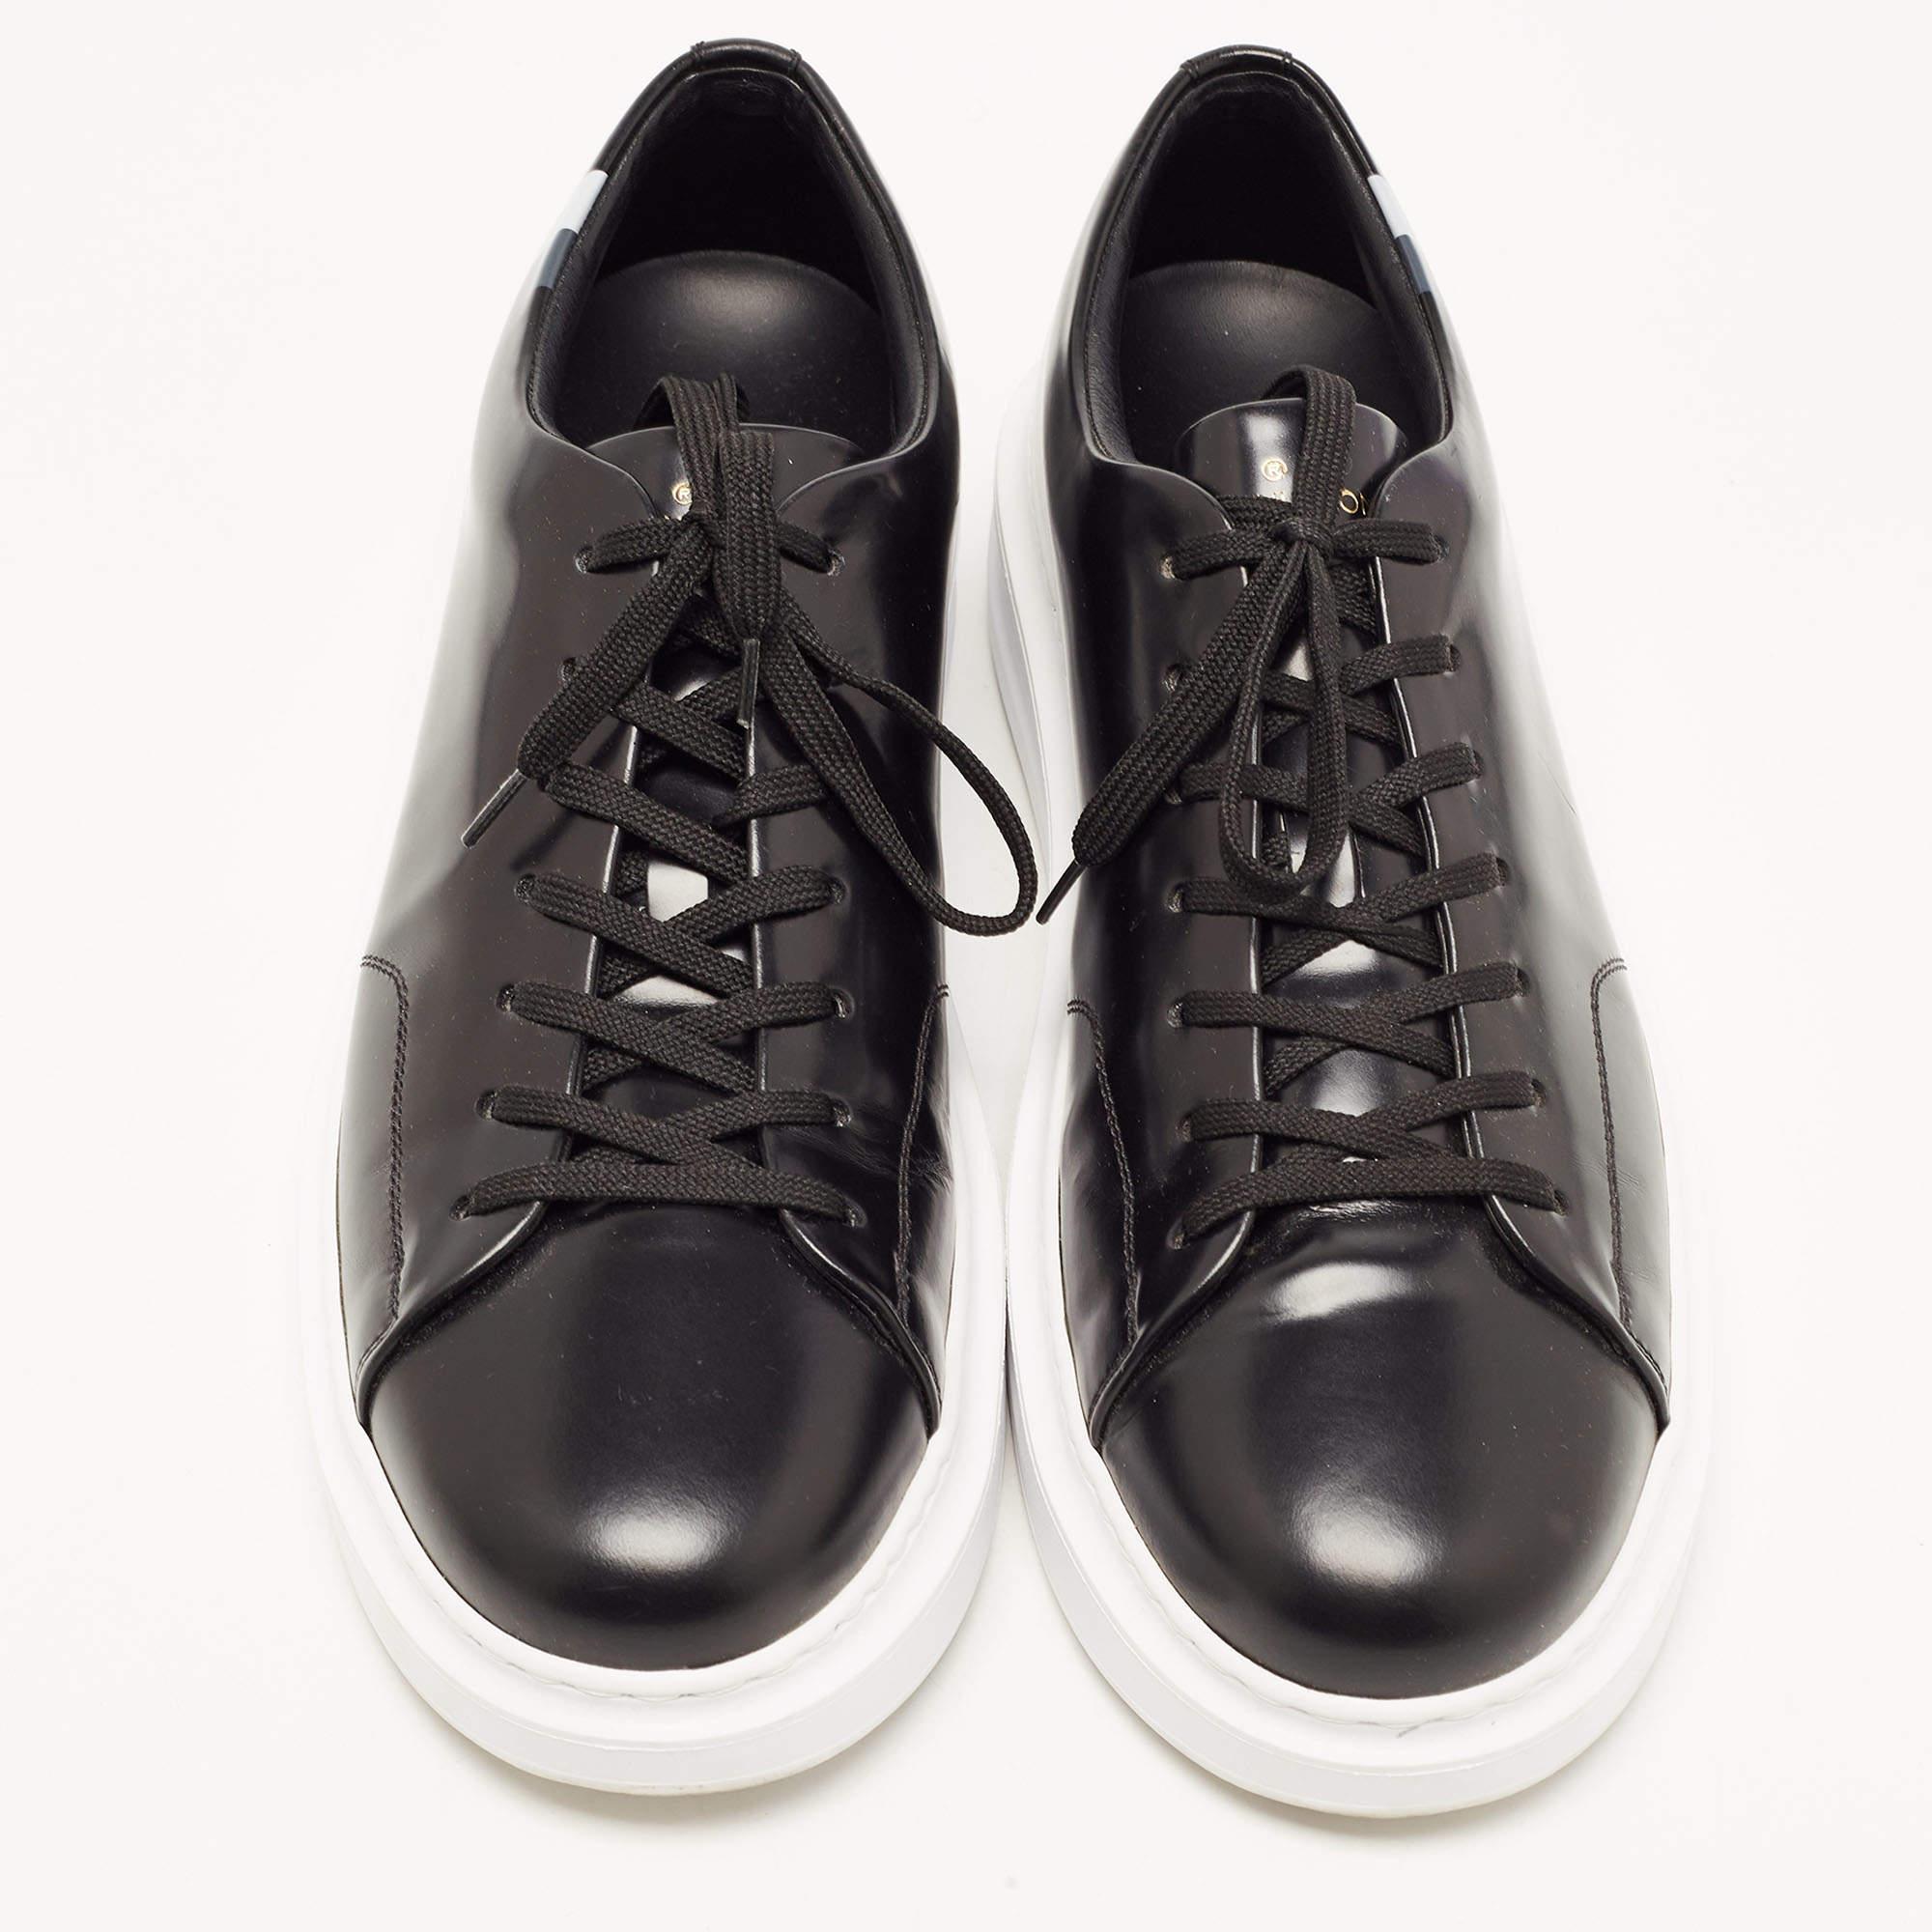 Louis Vuitton Black Leather Beverly Hills Sneakers Size 44 3